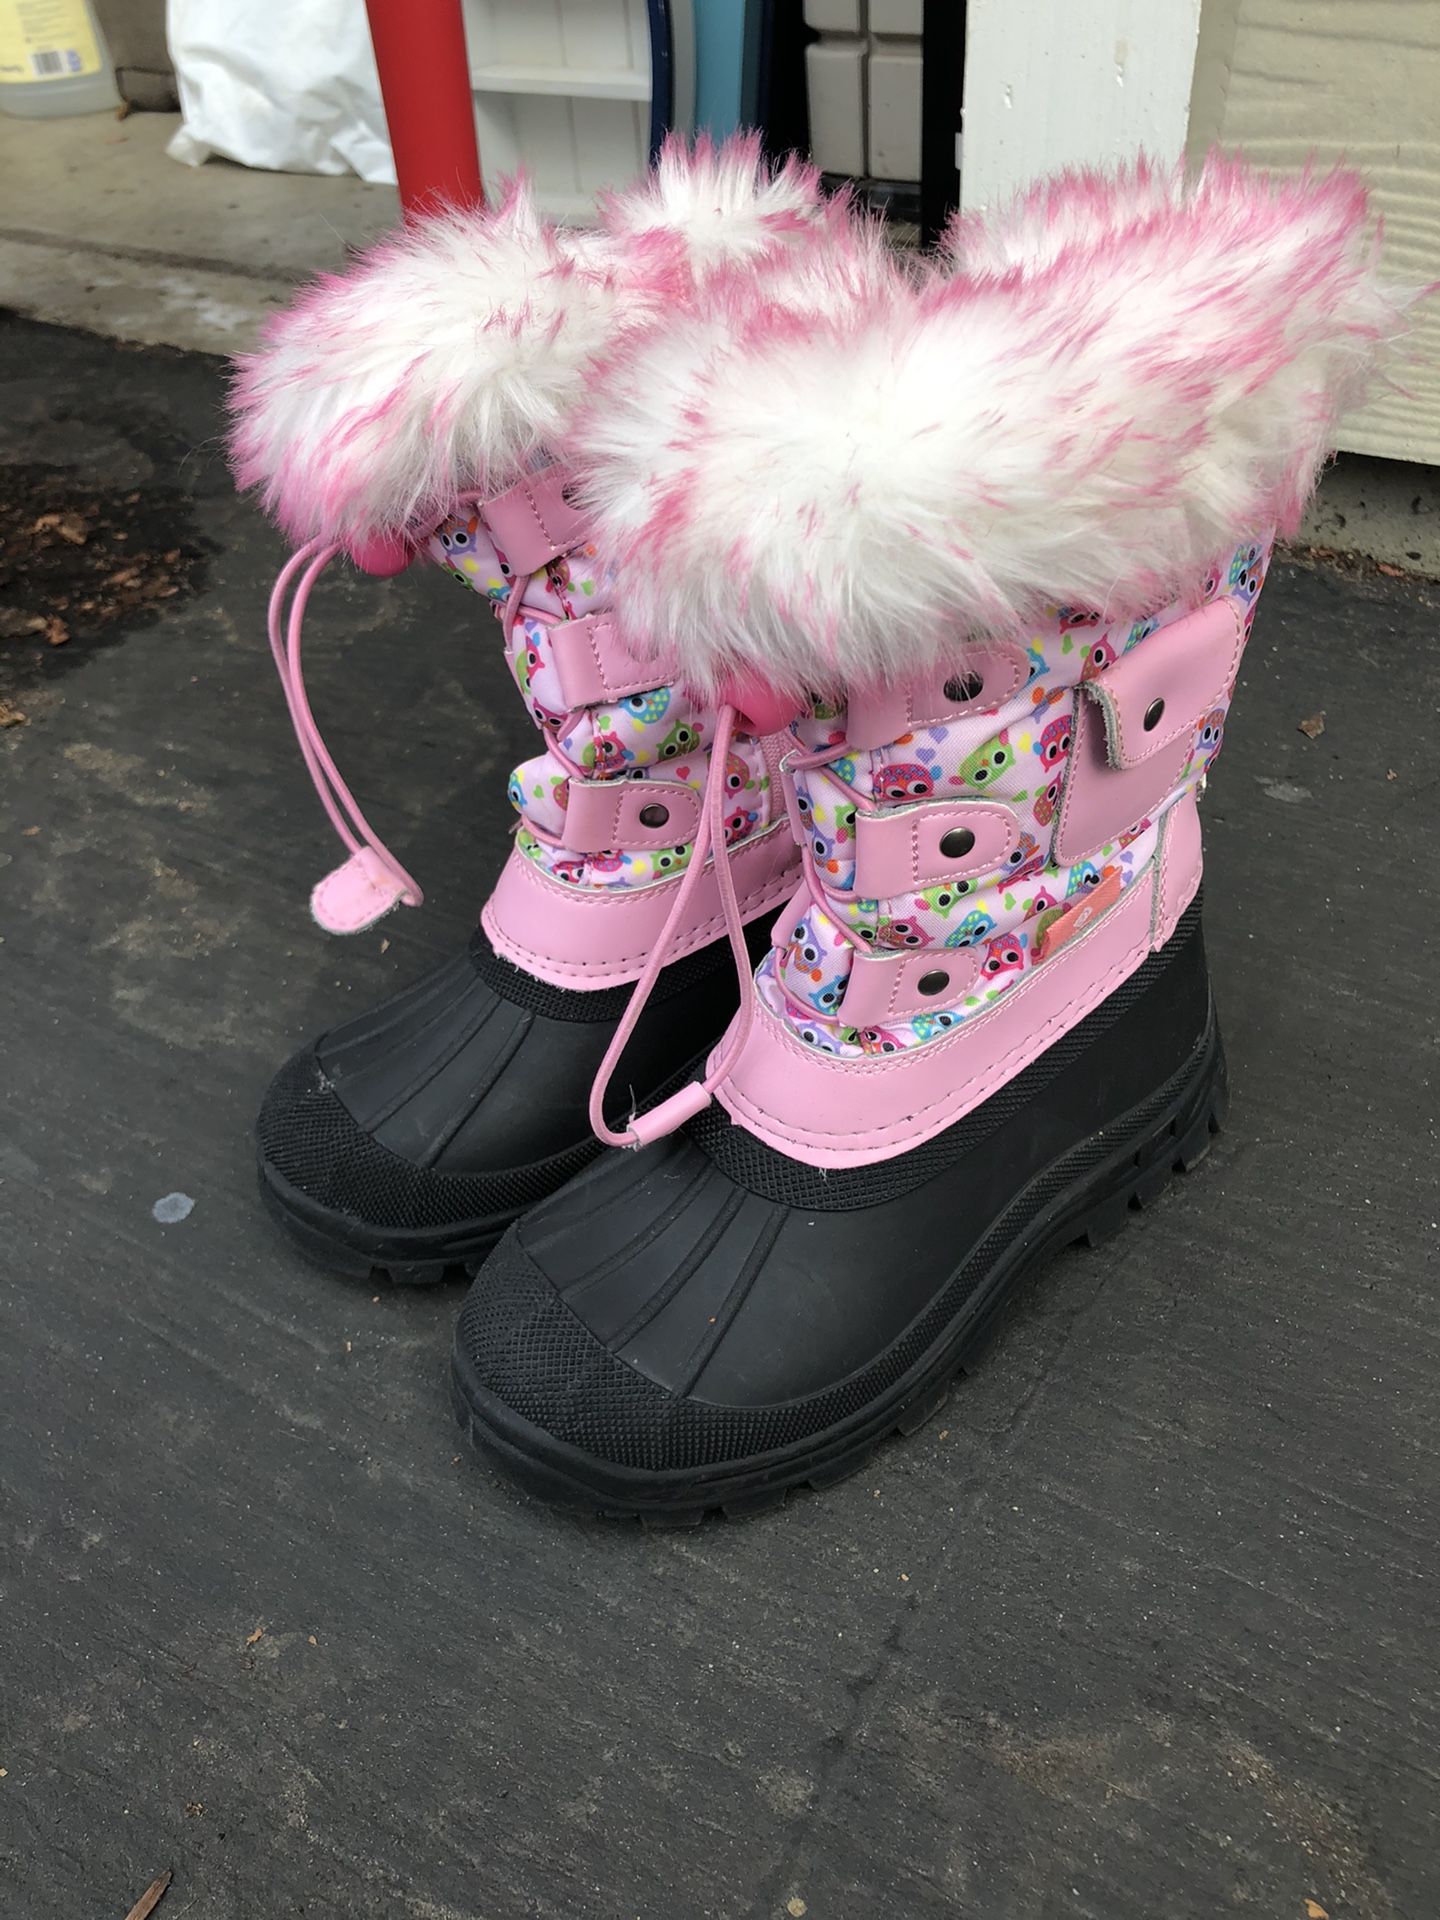 Girls size 12 snow boots